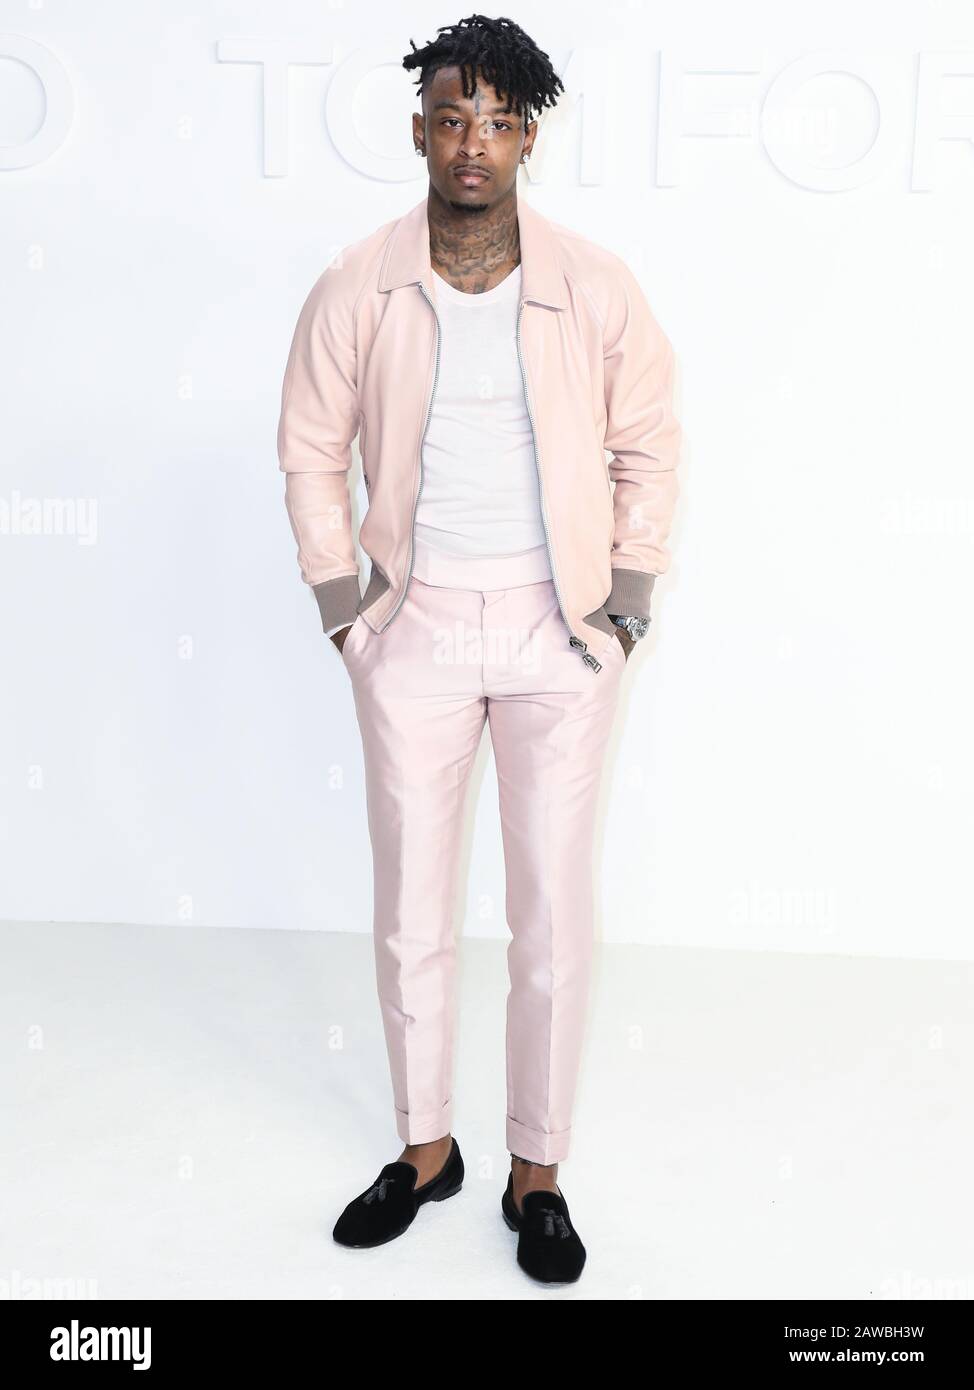 Download 21 Savage LV Summer Outfit Wallpaper